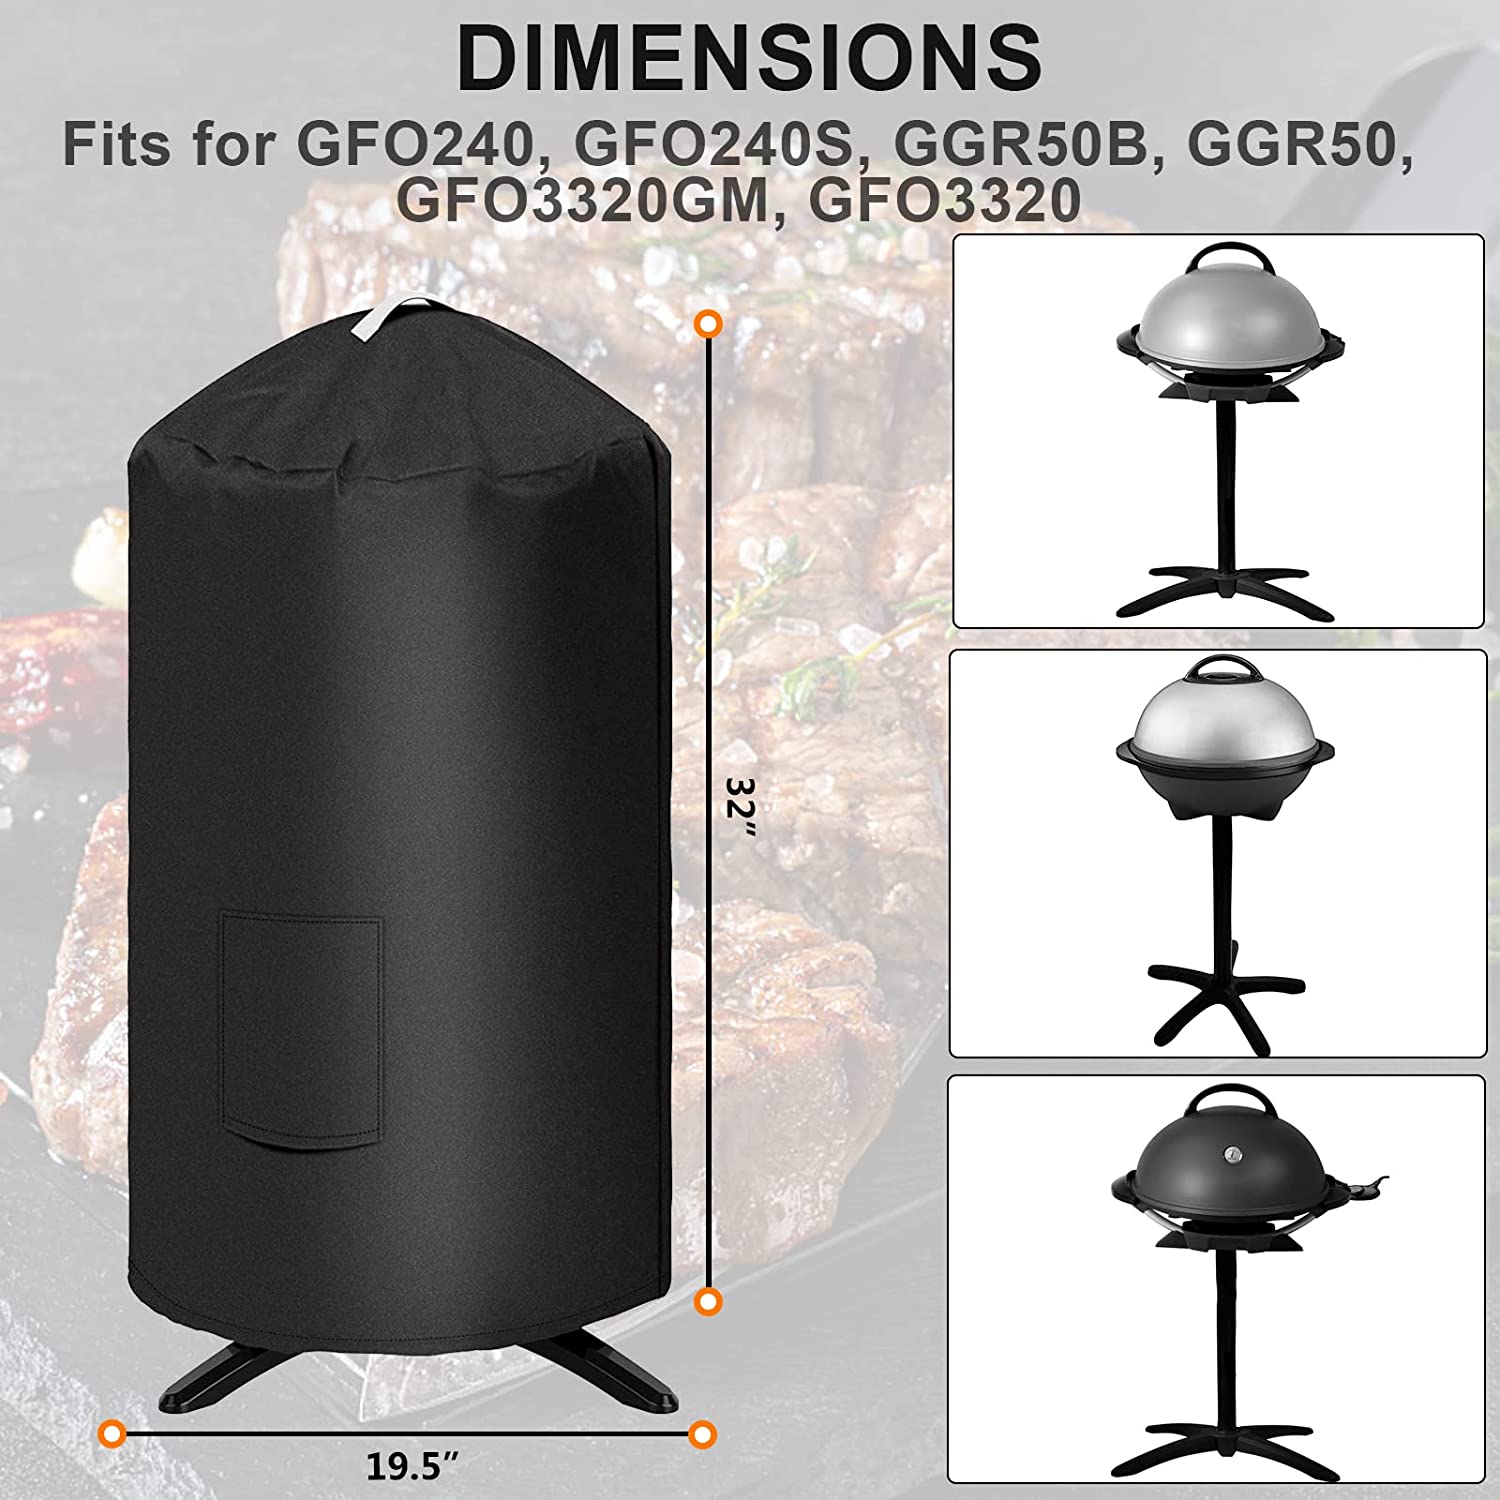 Grisun Grill Cover for George Foreman GGR50B, GFO3320, GFO240 Electric Grill, Anti-Fade Waterproof Round Grill Cover, Handle for Easy Taking Off, Full-Length Wrap Protection - image 2 of 7